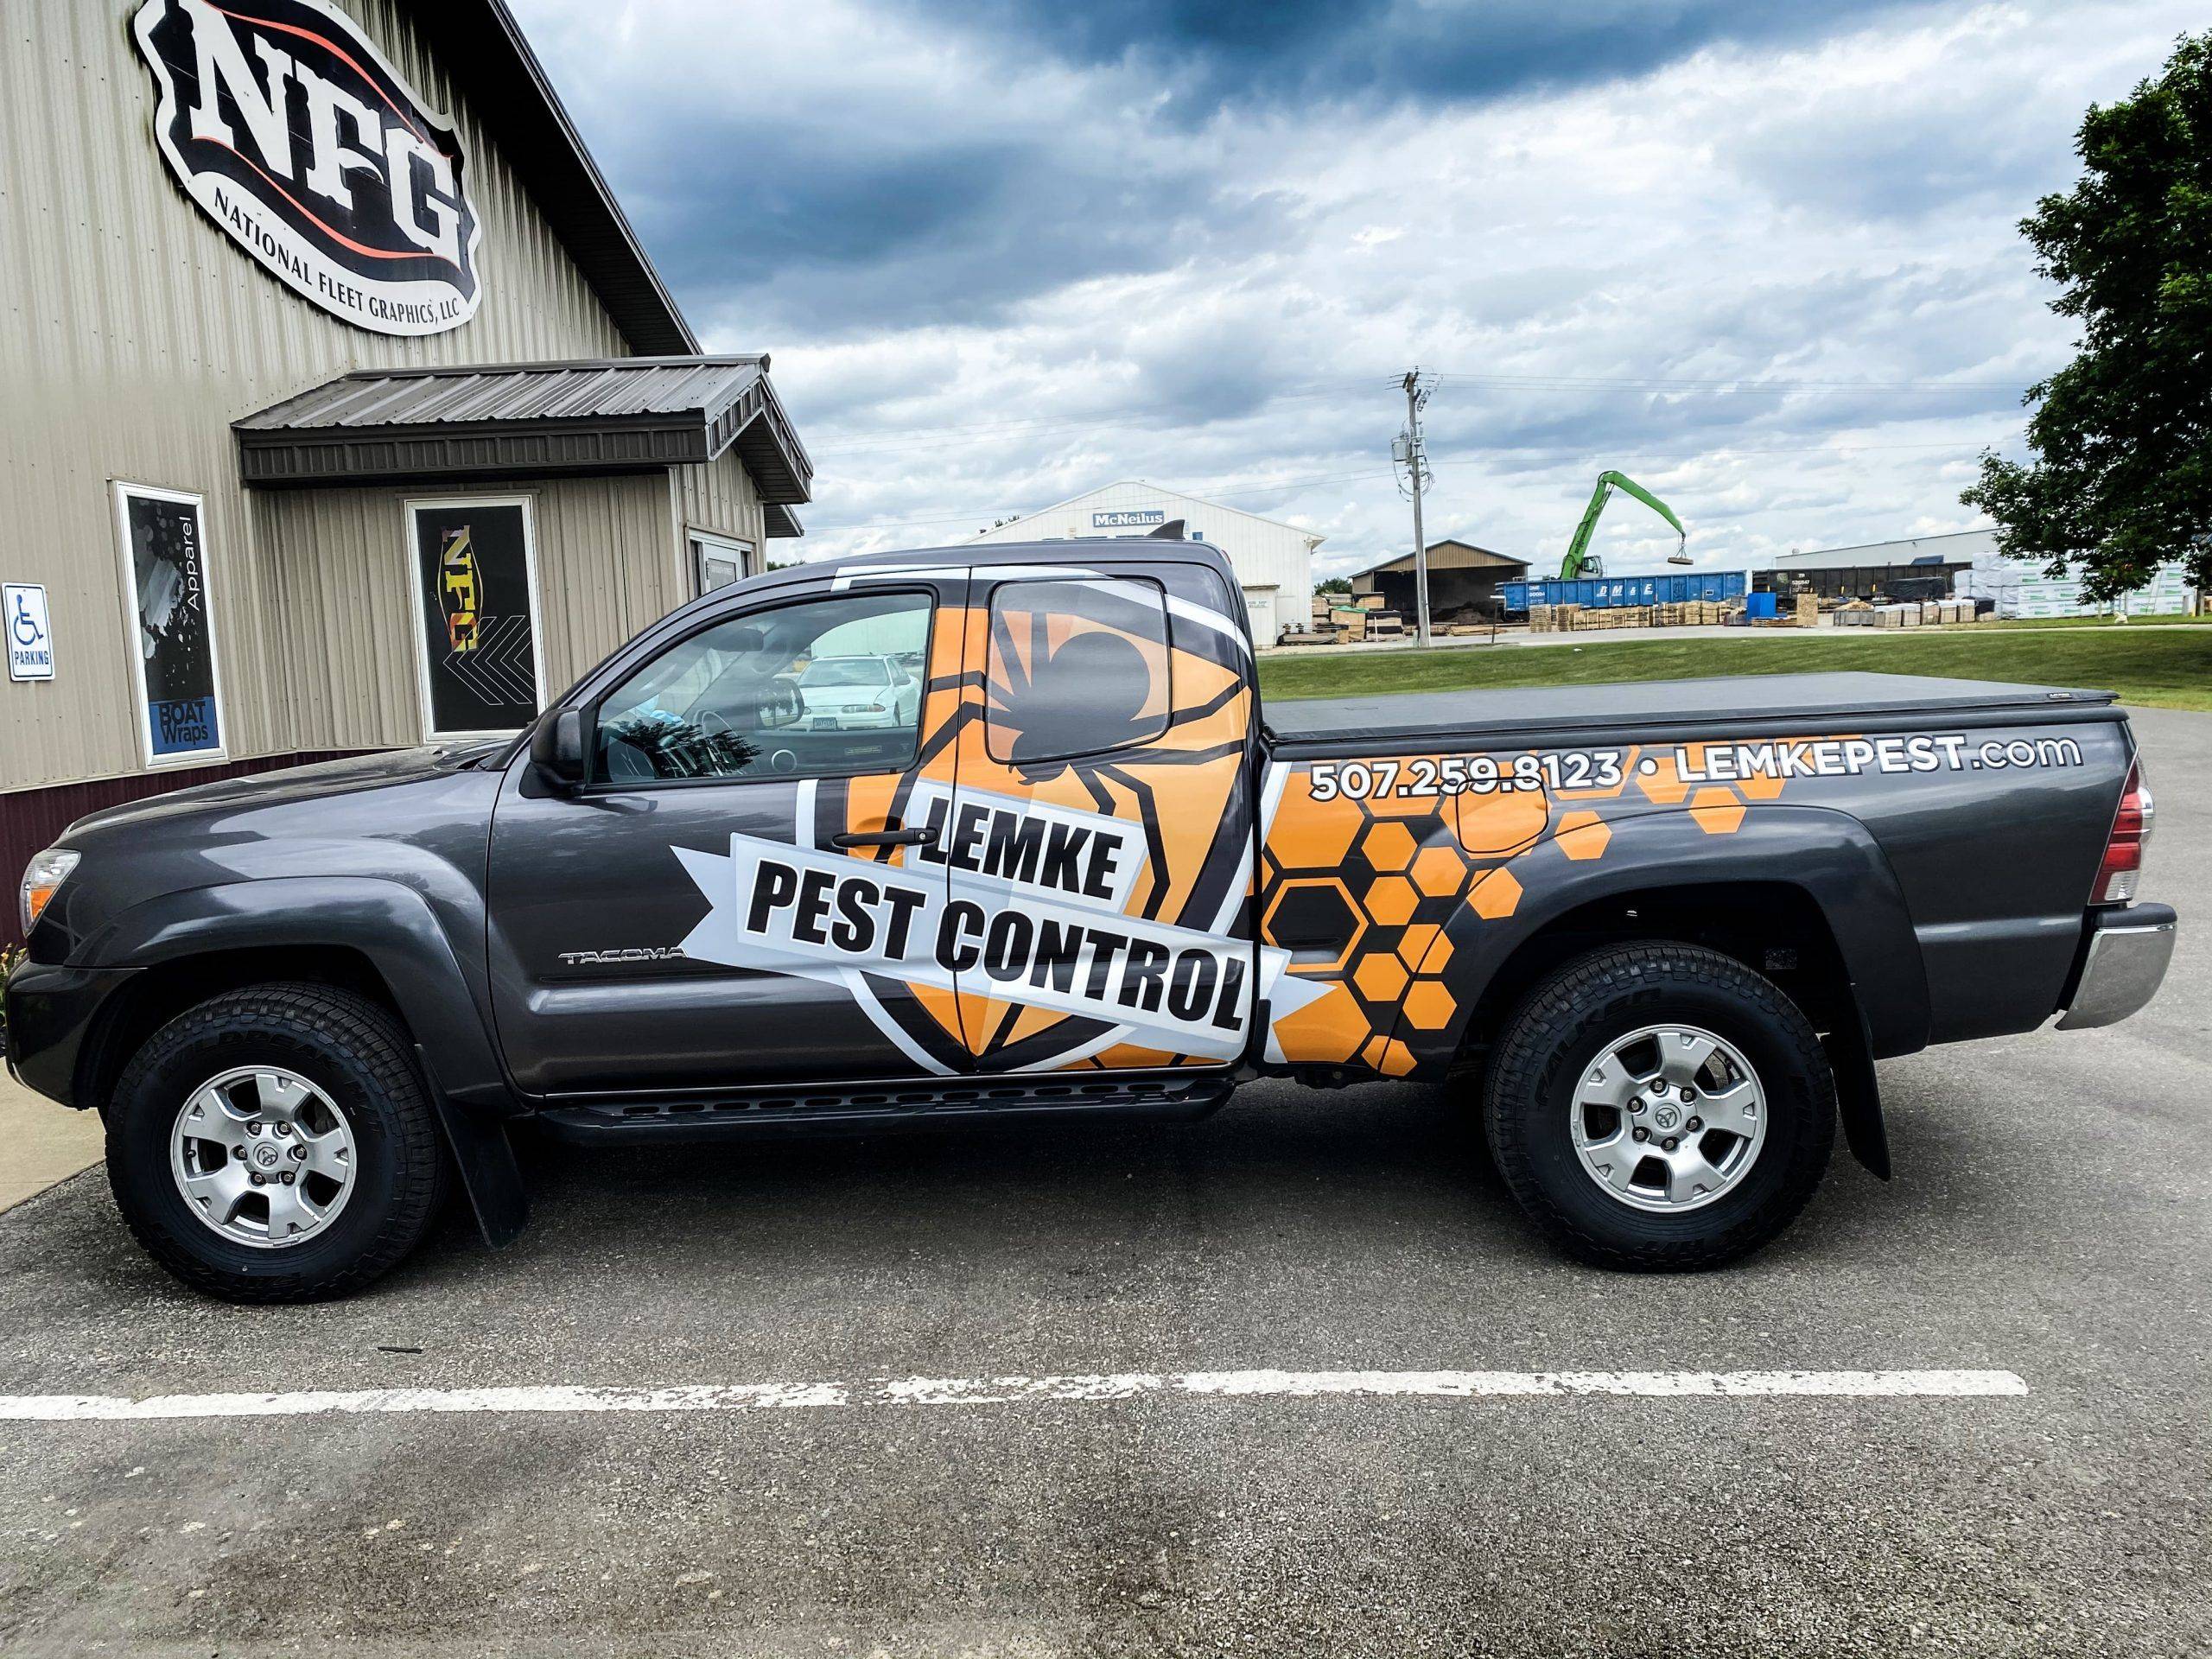 You are currently viewing Passive Marketing | Commercial Vehicle Wraps in Rochester